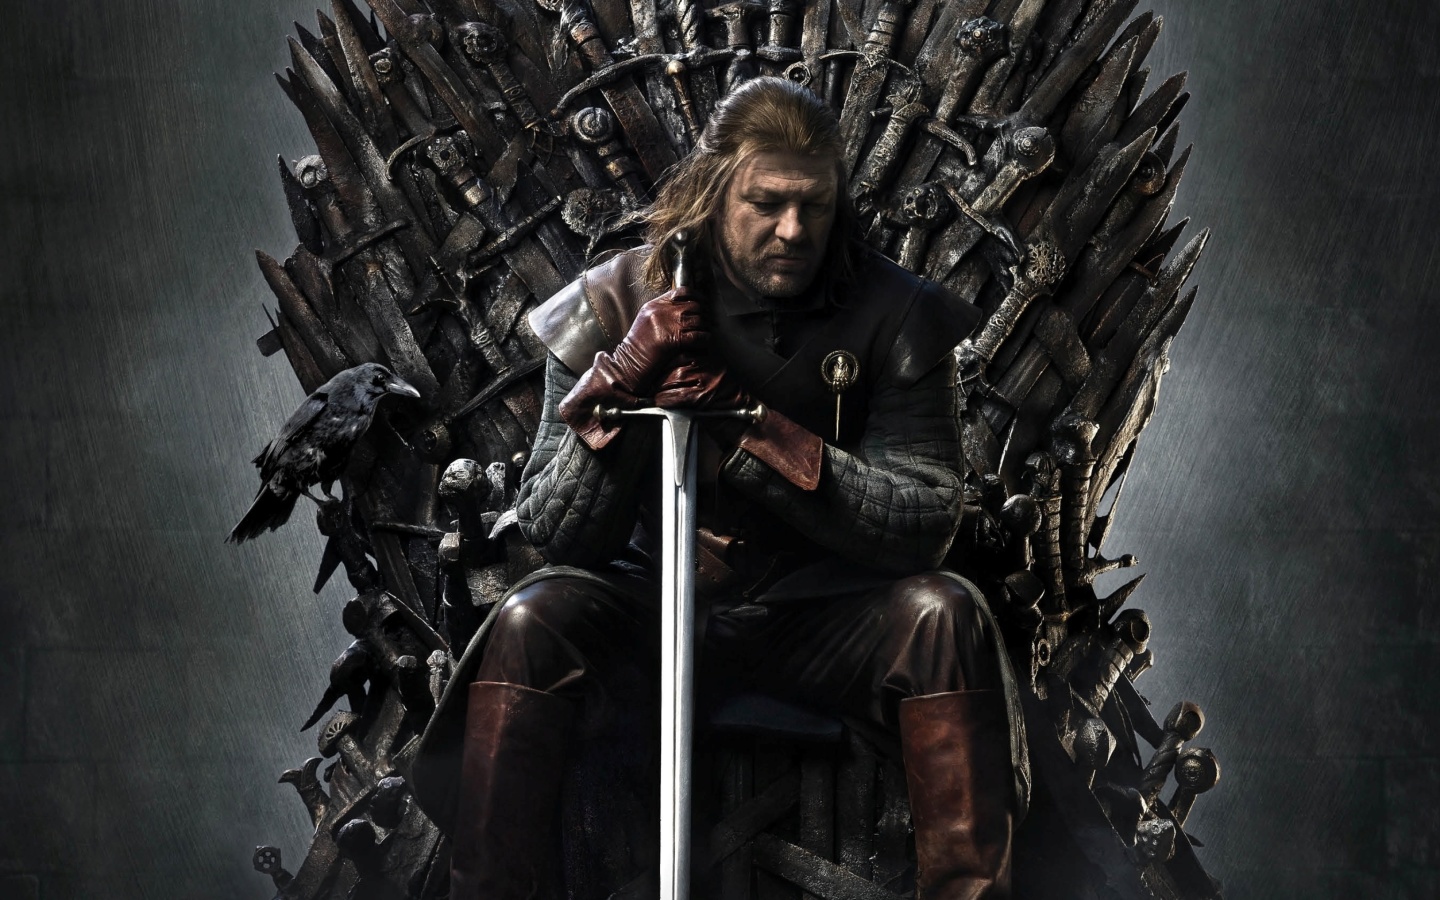 Обои Game Of Thrones A Song of Ice and Fire with Ned Star 1440x900